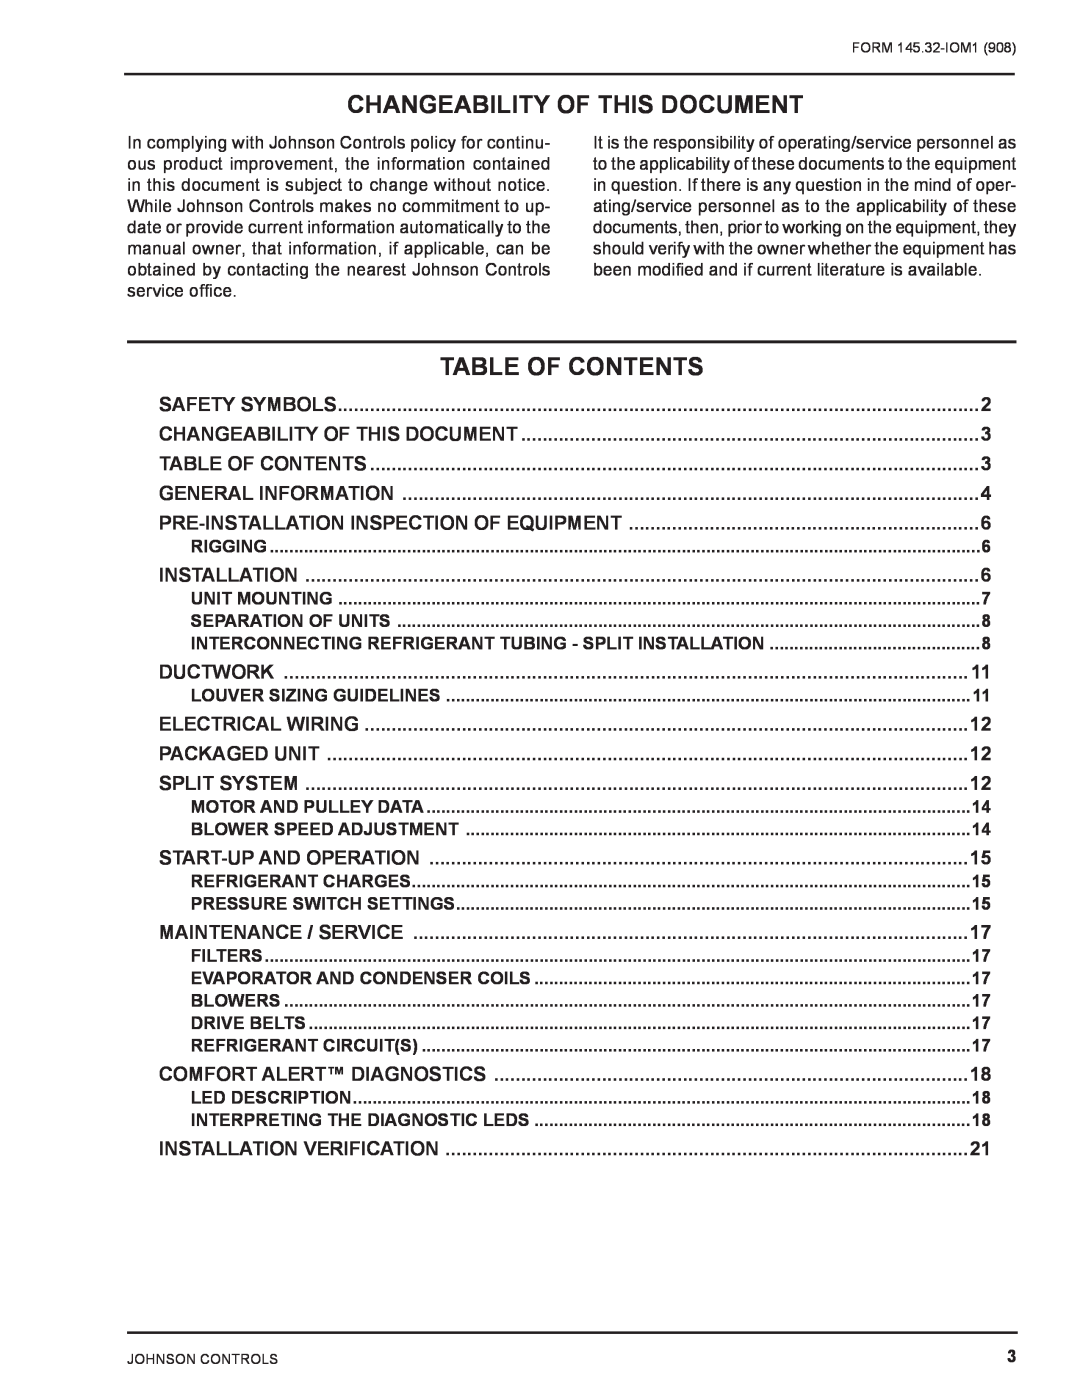 Energy Tech Laboratories DSH installation instructions Changeability of this document, Table Of Contents 